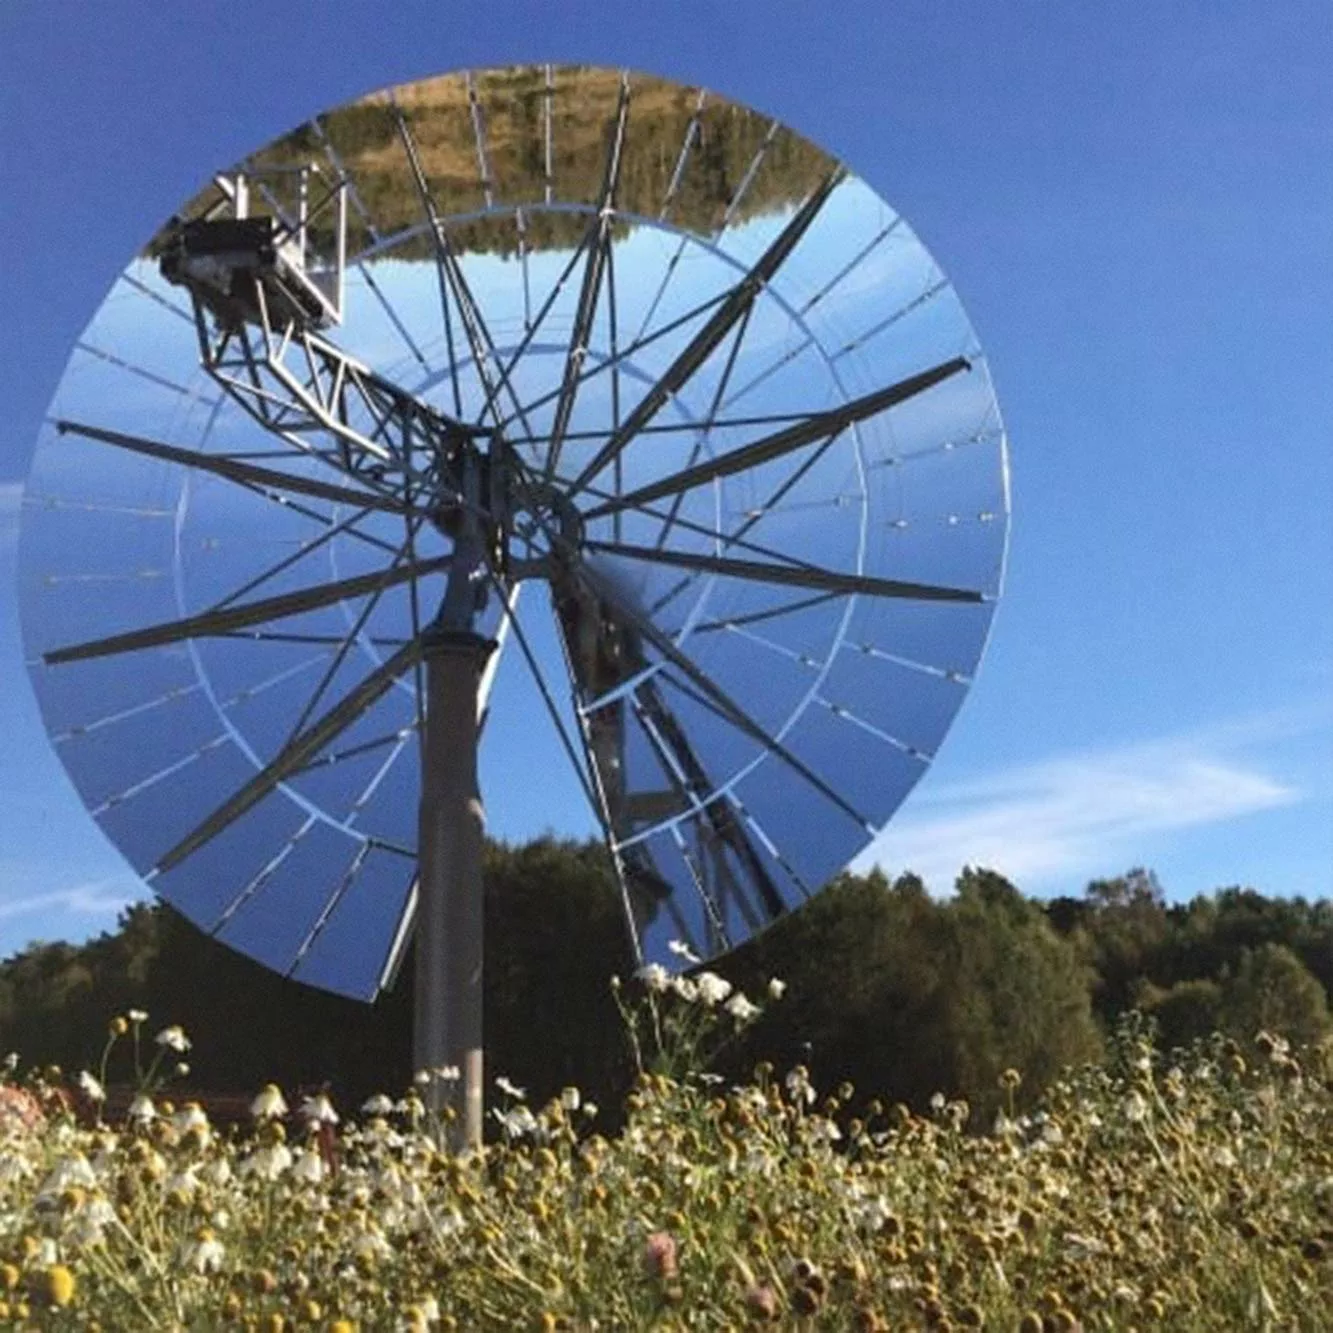 A solar concentrator with 66 mirror elements in front of a field on a sunny day